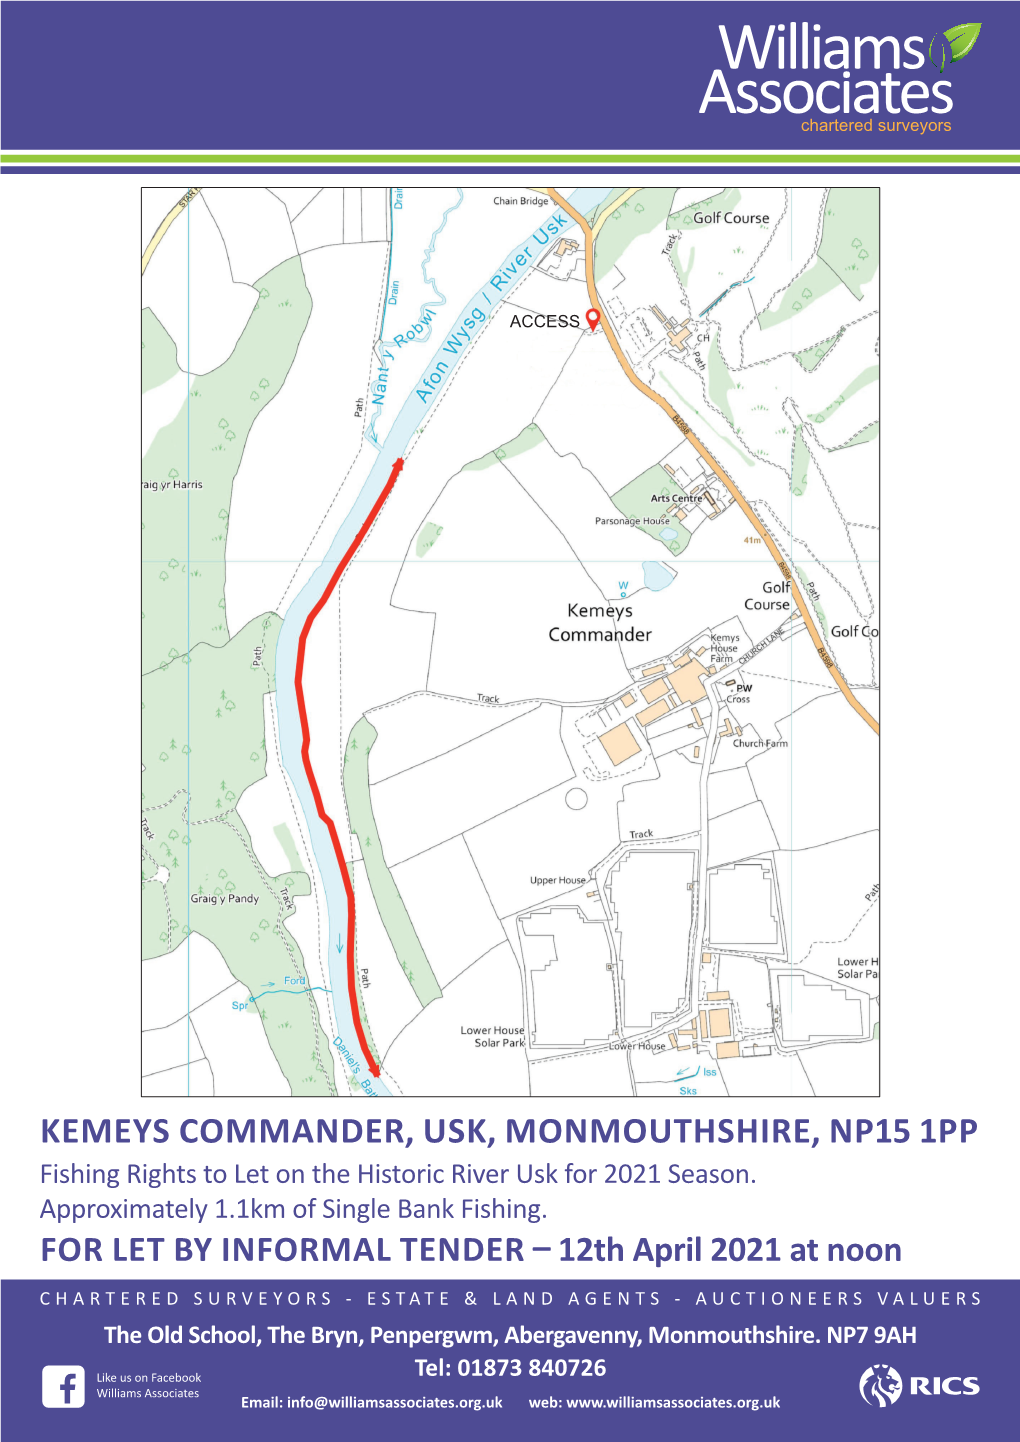 KEMEYS COMMANDER, USK, MONMOUTHSHIRE, NP15 1PP Fishing Rights to Let on the Historic River Usk for 2021 Season